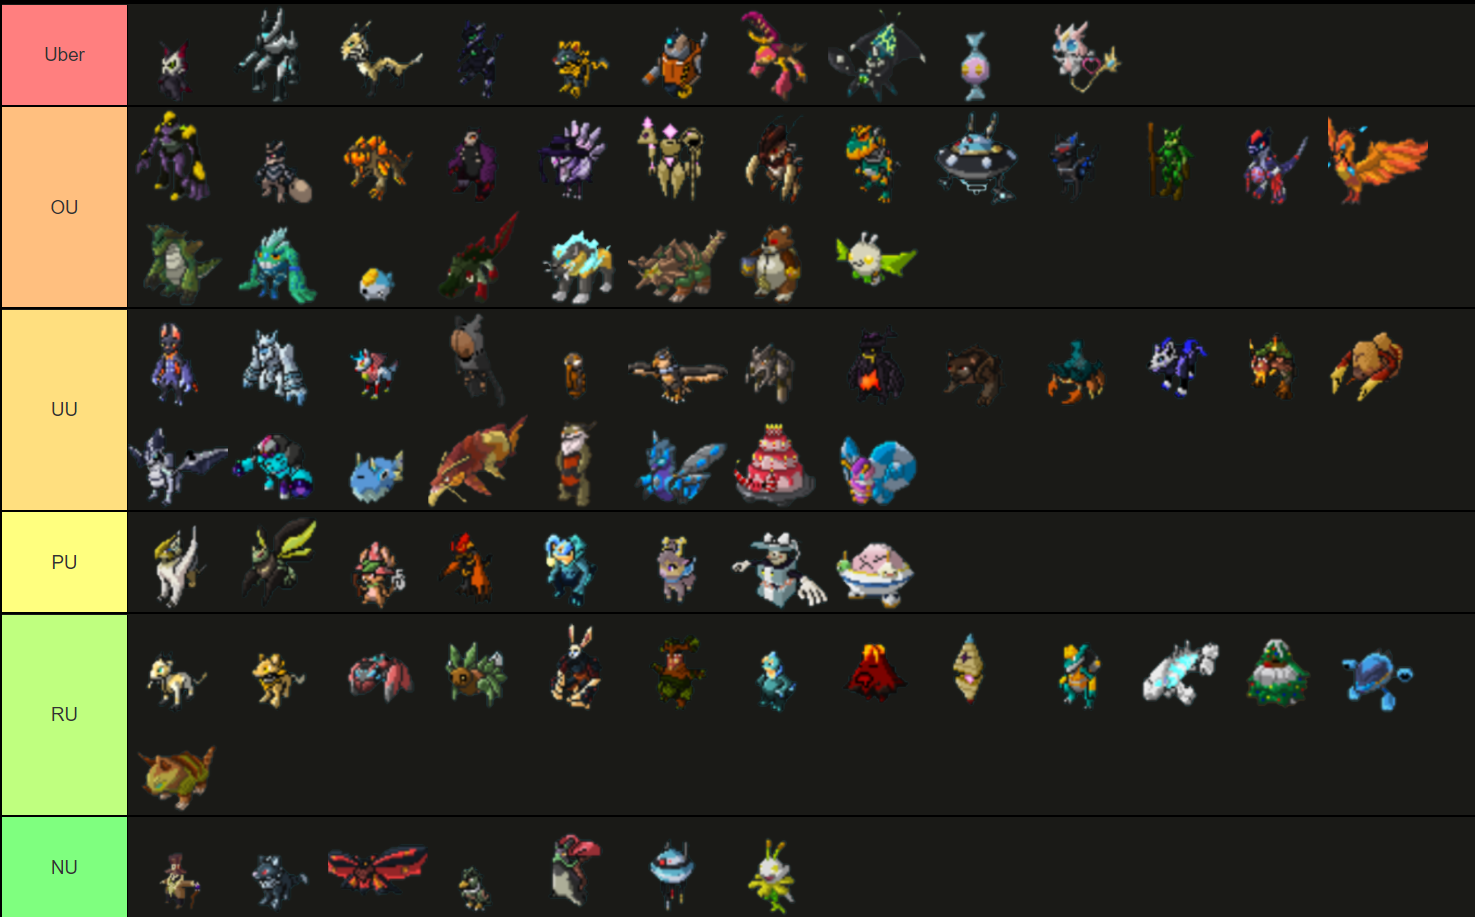 Create a Loomian Legacy rs Tier List - TierMaker